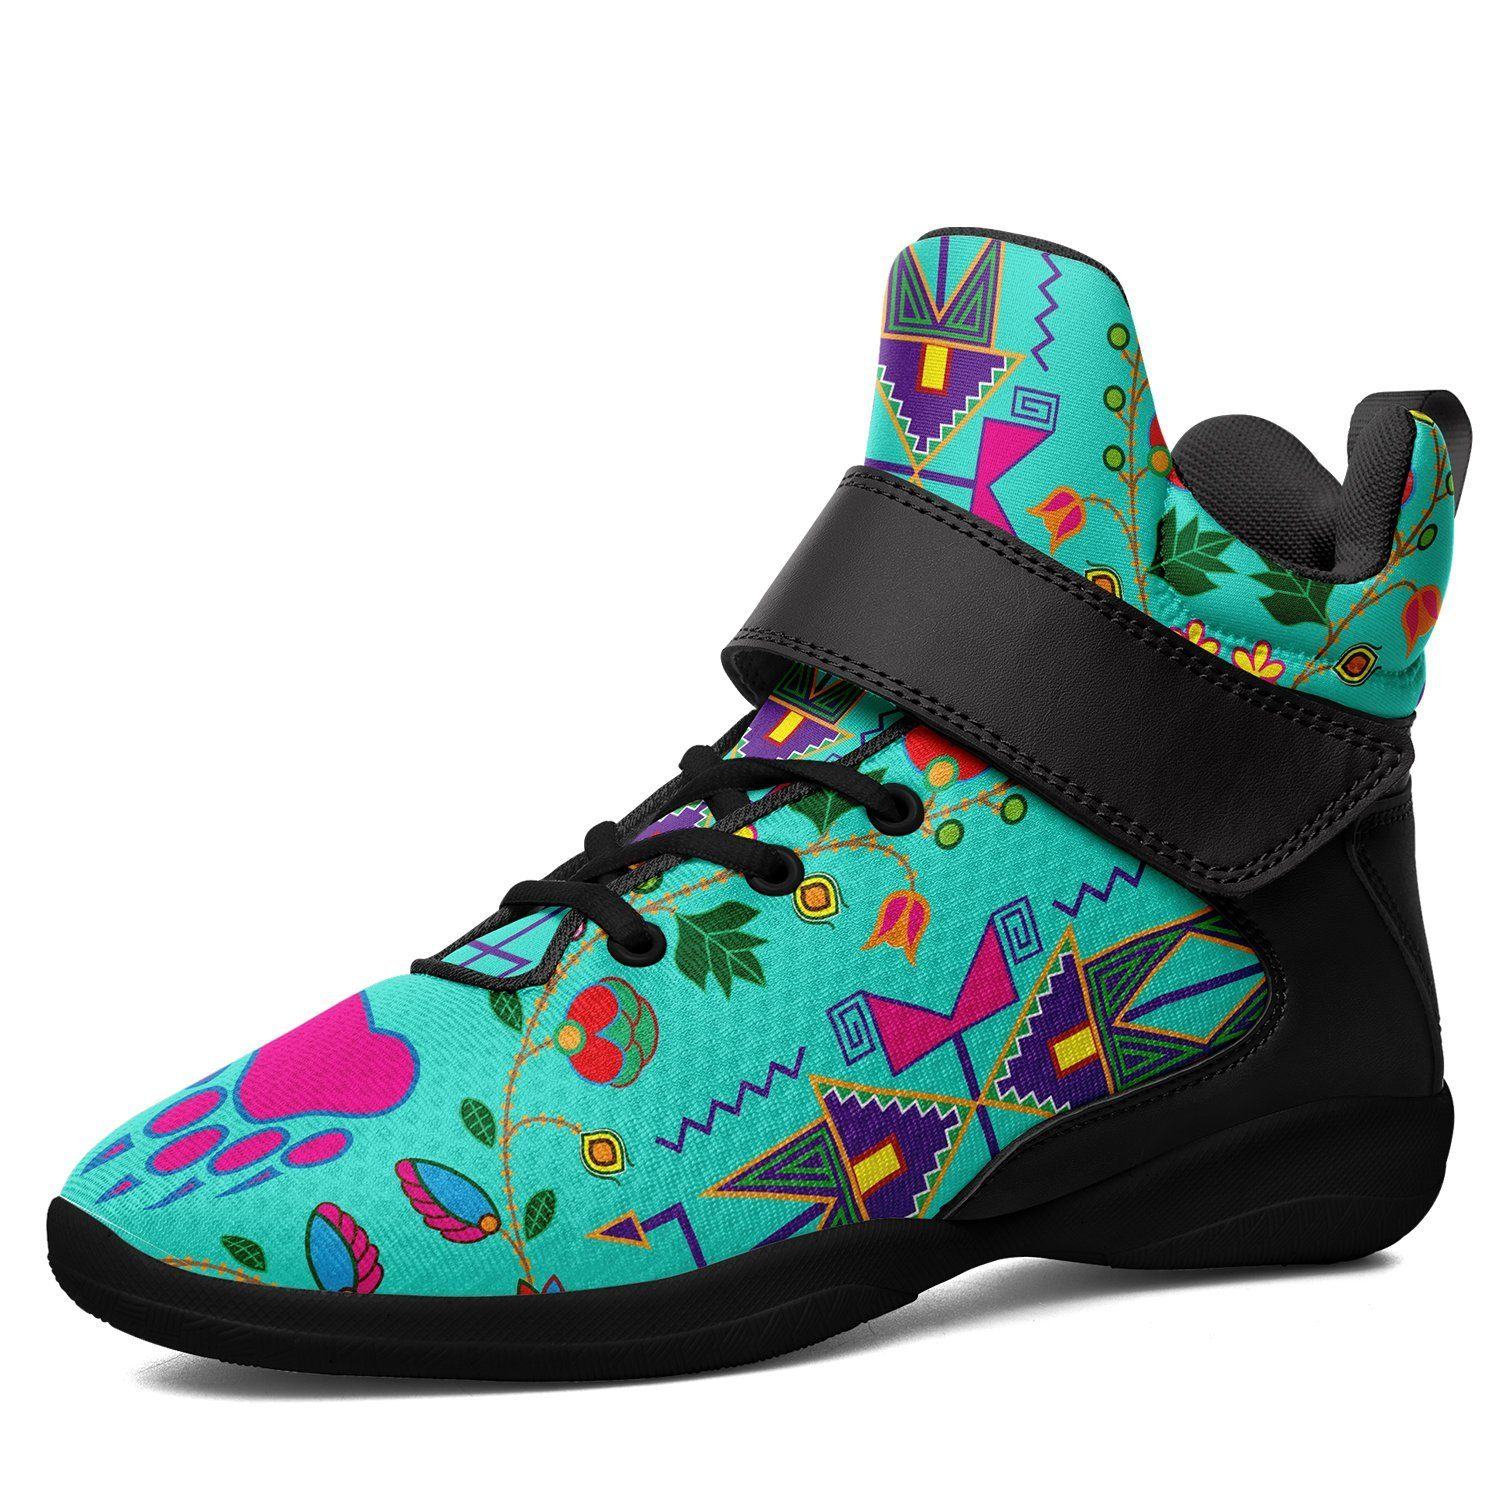 Geometric Floral Fall Sky Ipottaa Basketball / Sport High Top Shoes - Black Sole 49 Dzine US Men 7 / EUR 40 Black Sole with Black Strap 